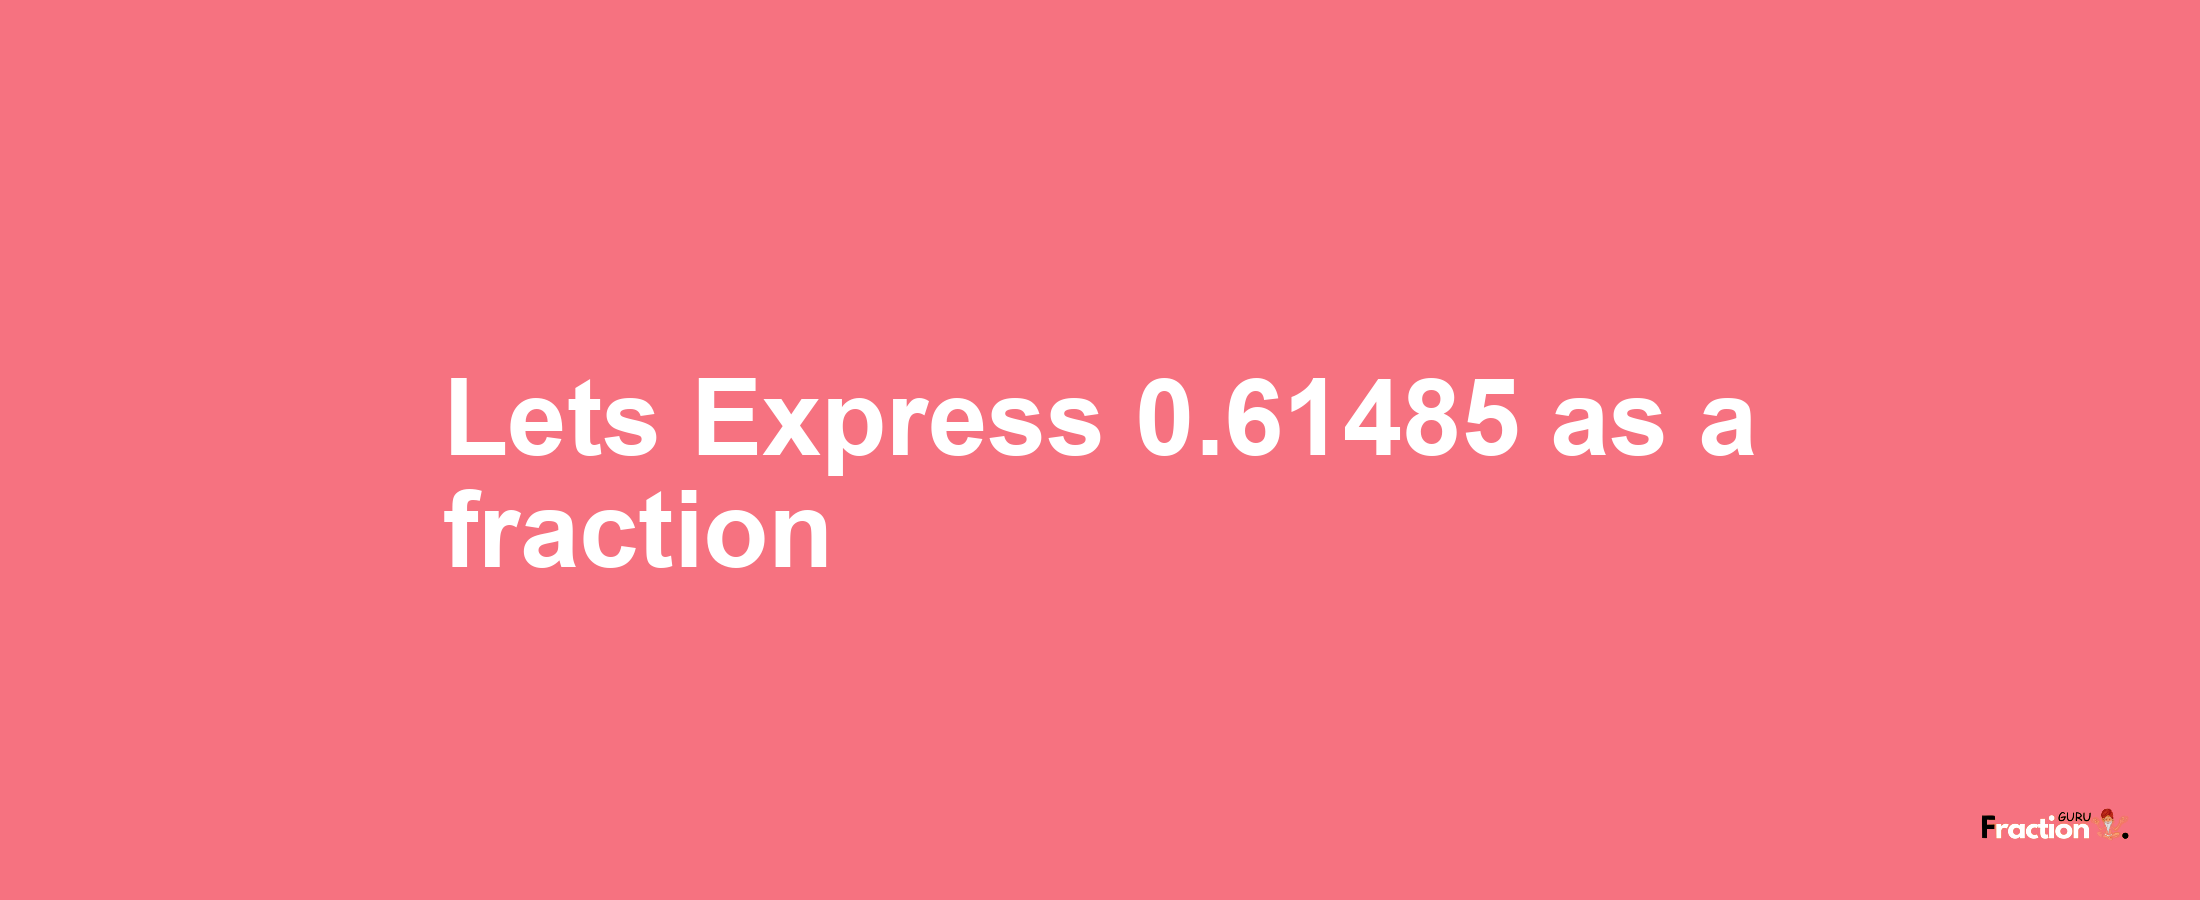 Lets Express 0.61485 as afraction